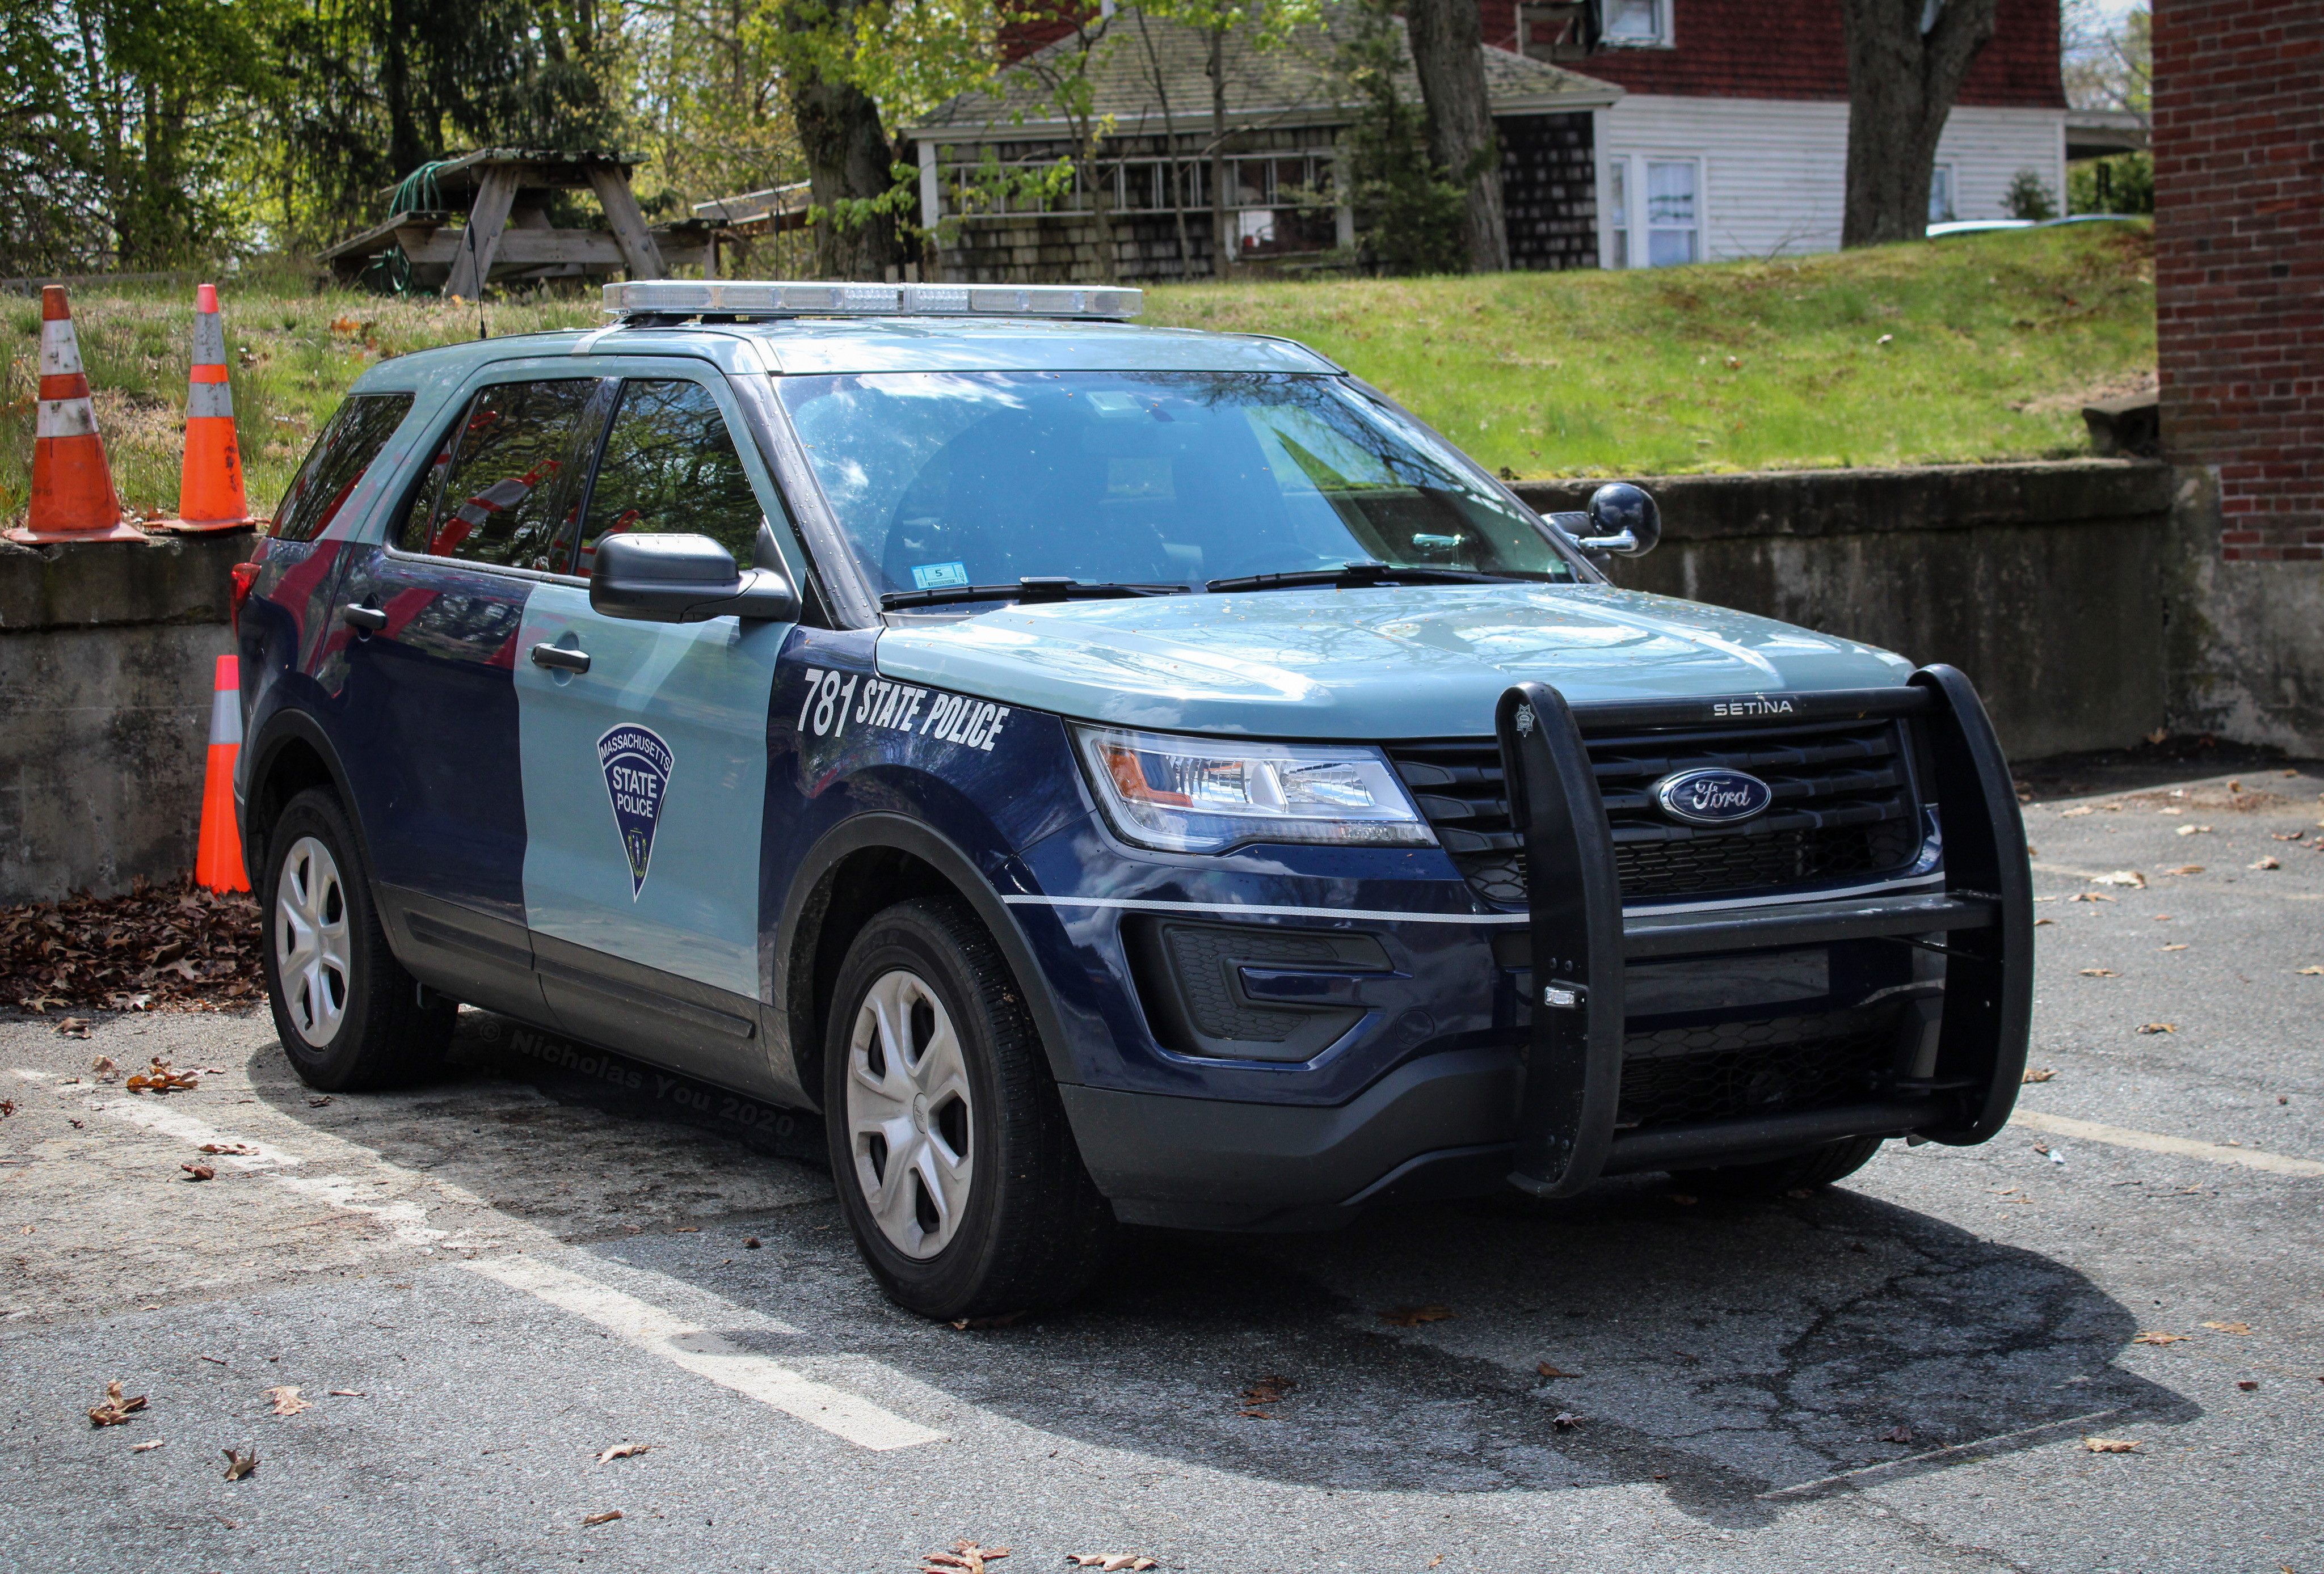 A photo  of Massachusetts State Police
            Cruiser 781, a 2018-2019 Ford Police Interceptor Utility             taken by Nicholas You